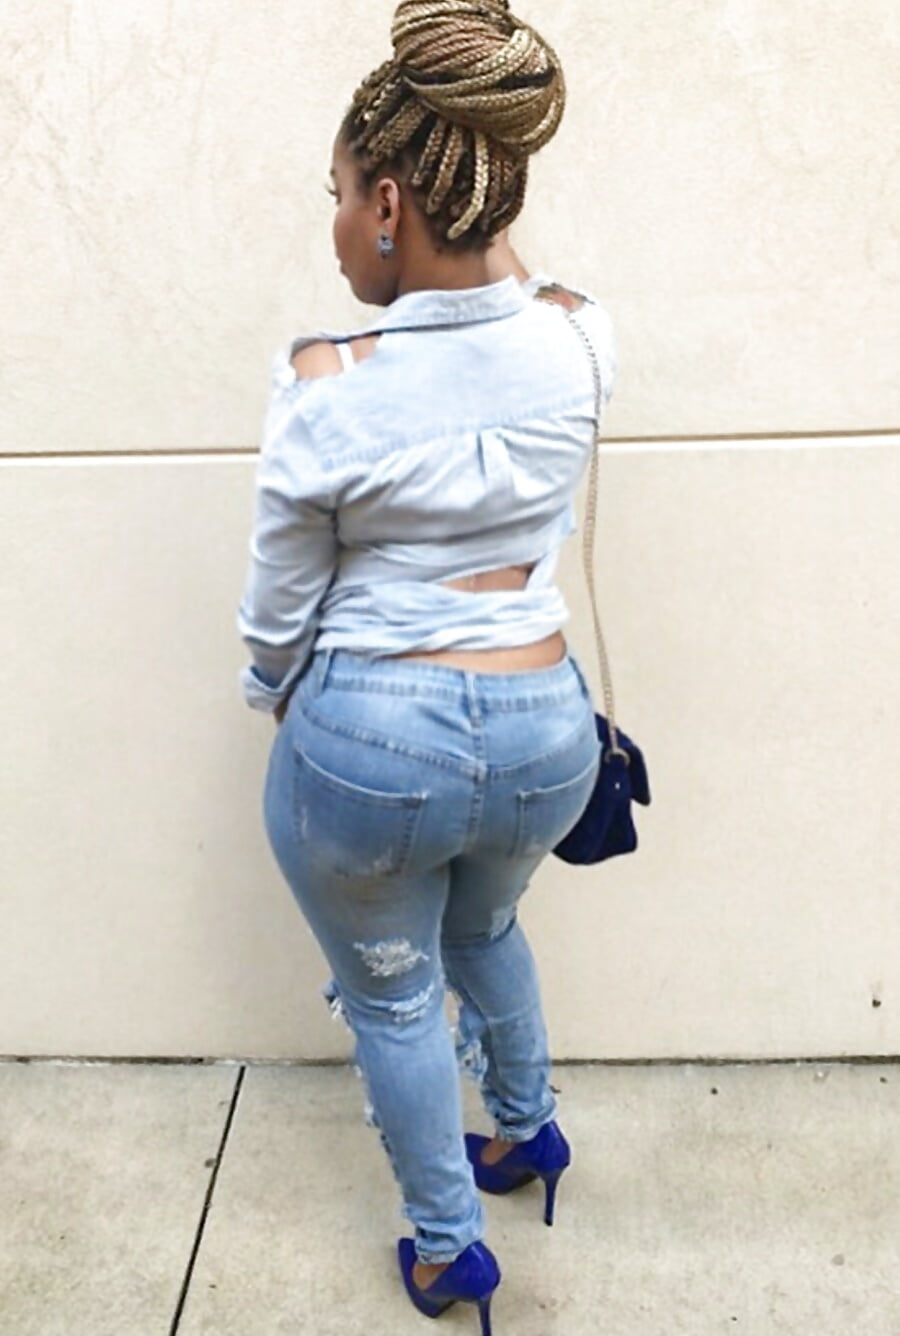 Black Asses in Jeans 6 (14/94)